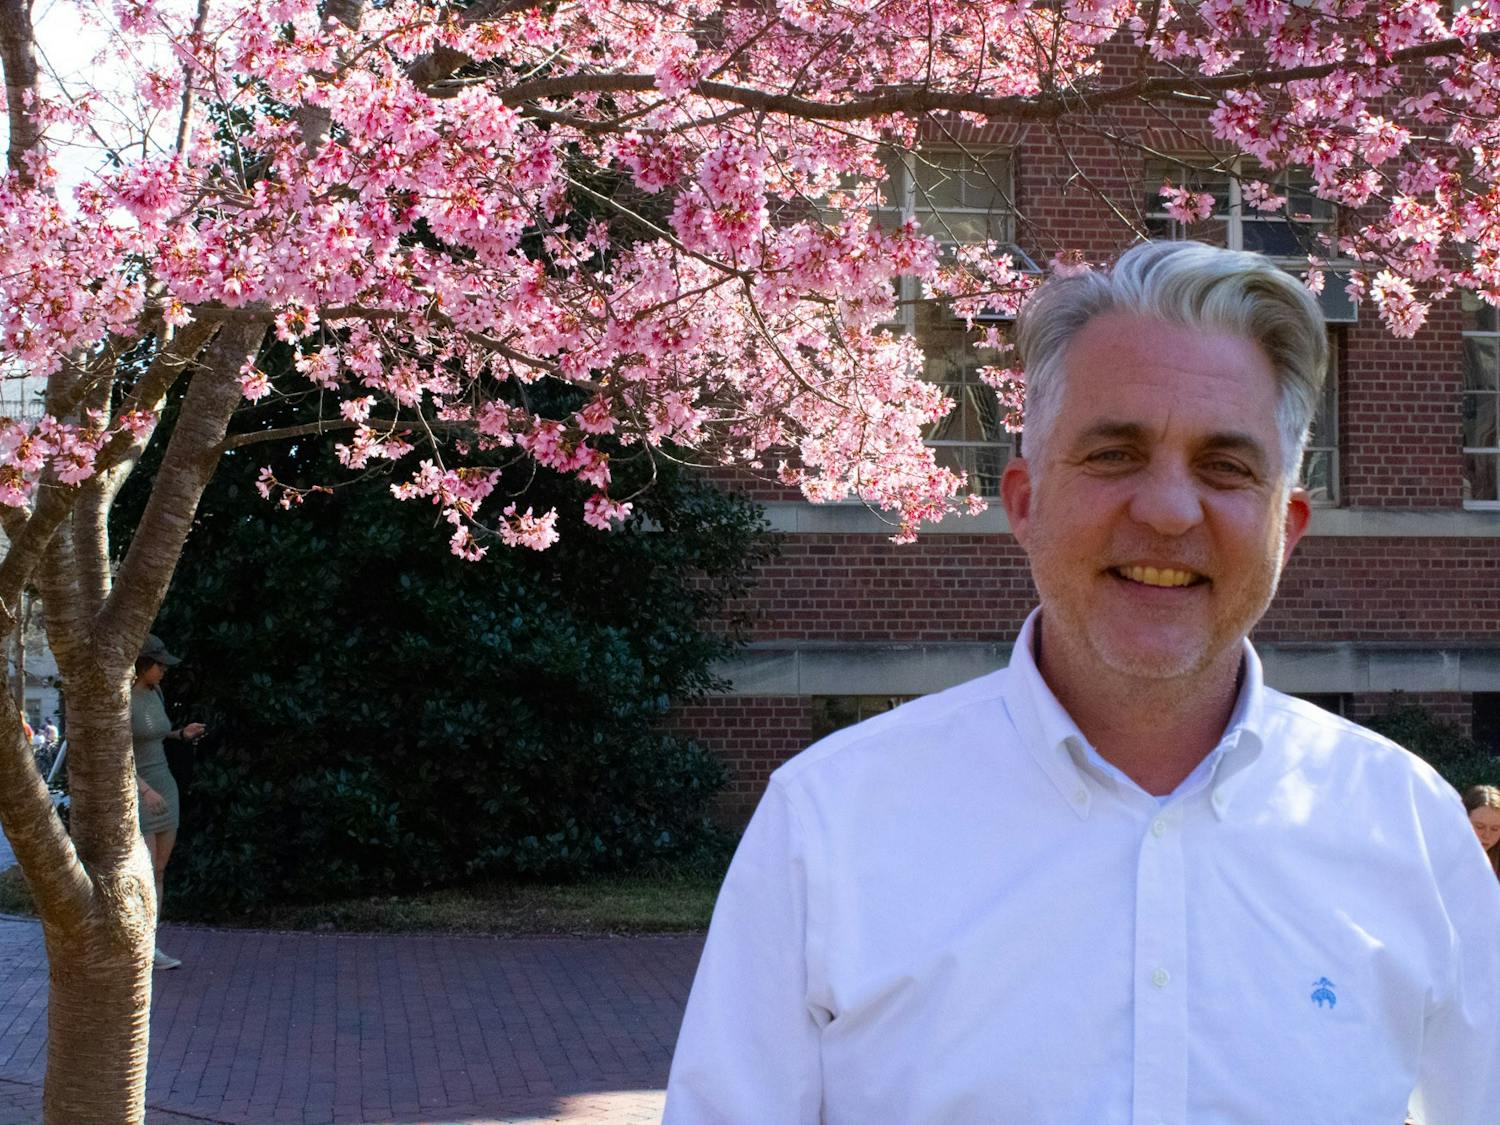 Jeff Warren is the executive director of the North Carolina Policy Collaboratory.
